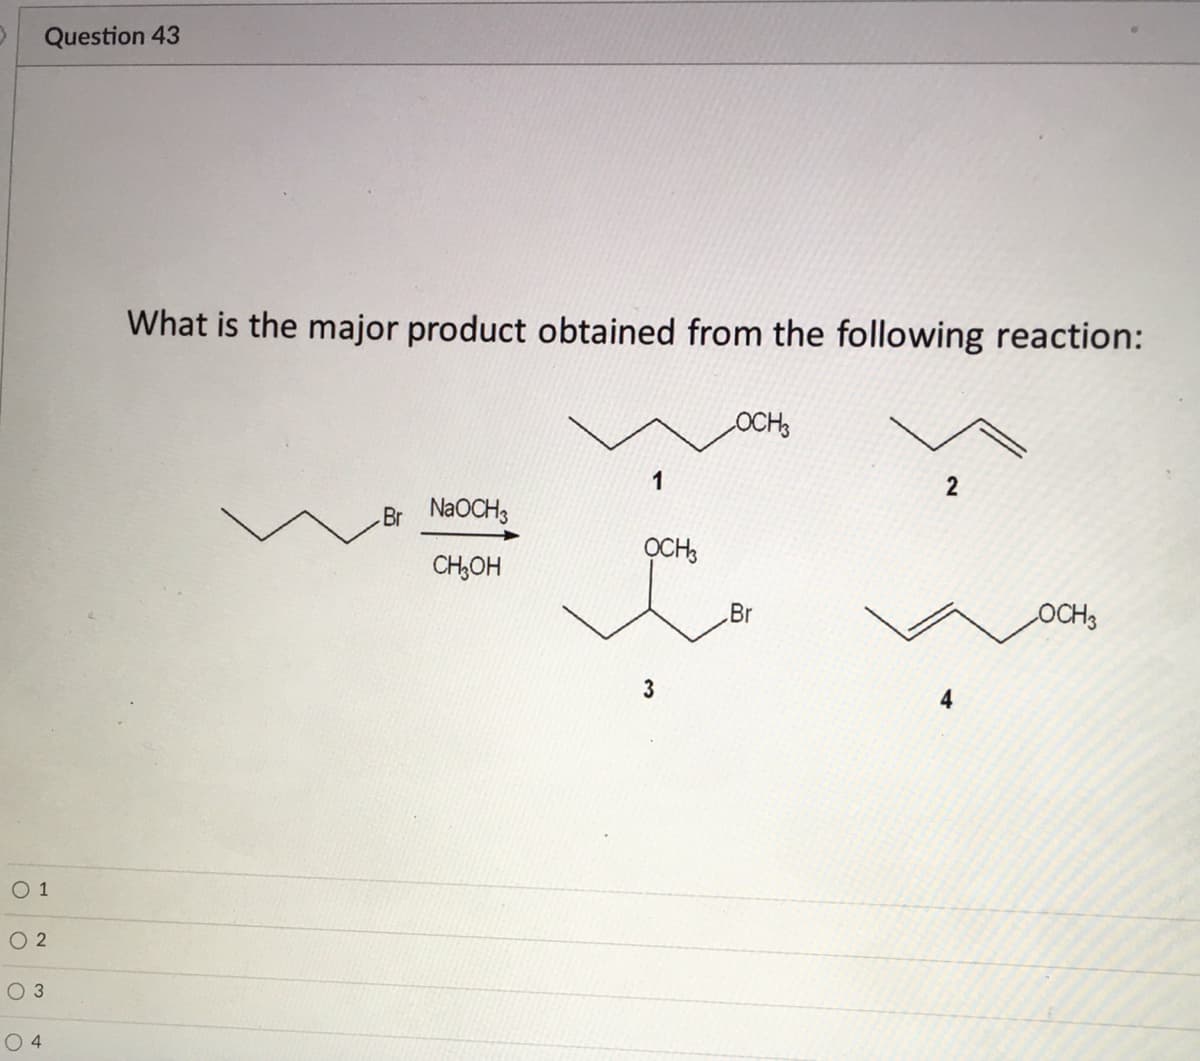 Question 43
What is the major product obtained from the following reaction:
OCH
1
2
Br NaOCH3
OCH,
CH,OH
Br
OCHS
3
O 1
O 2
O 3
O 4
